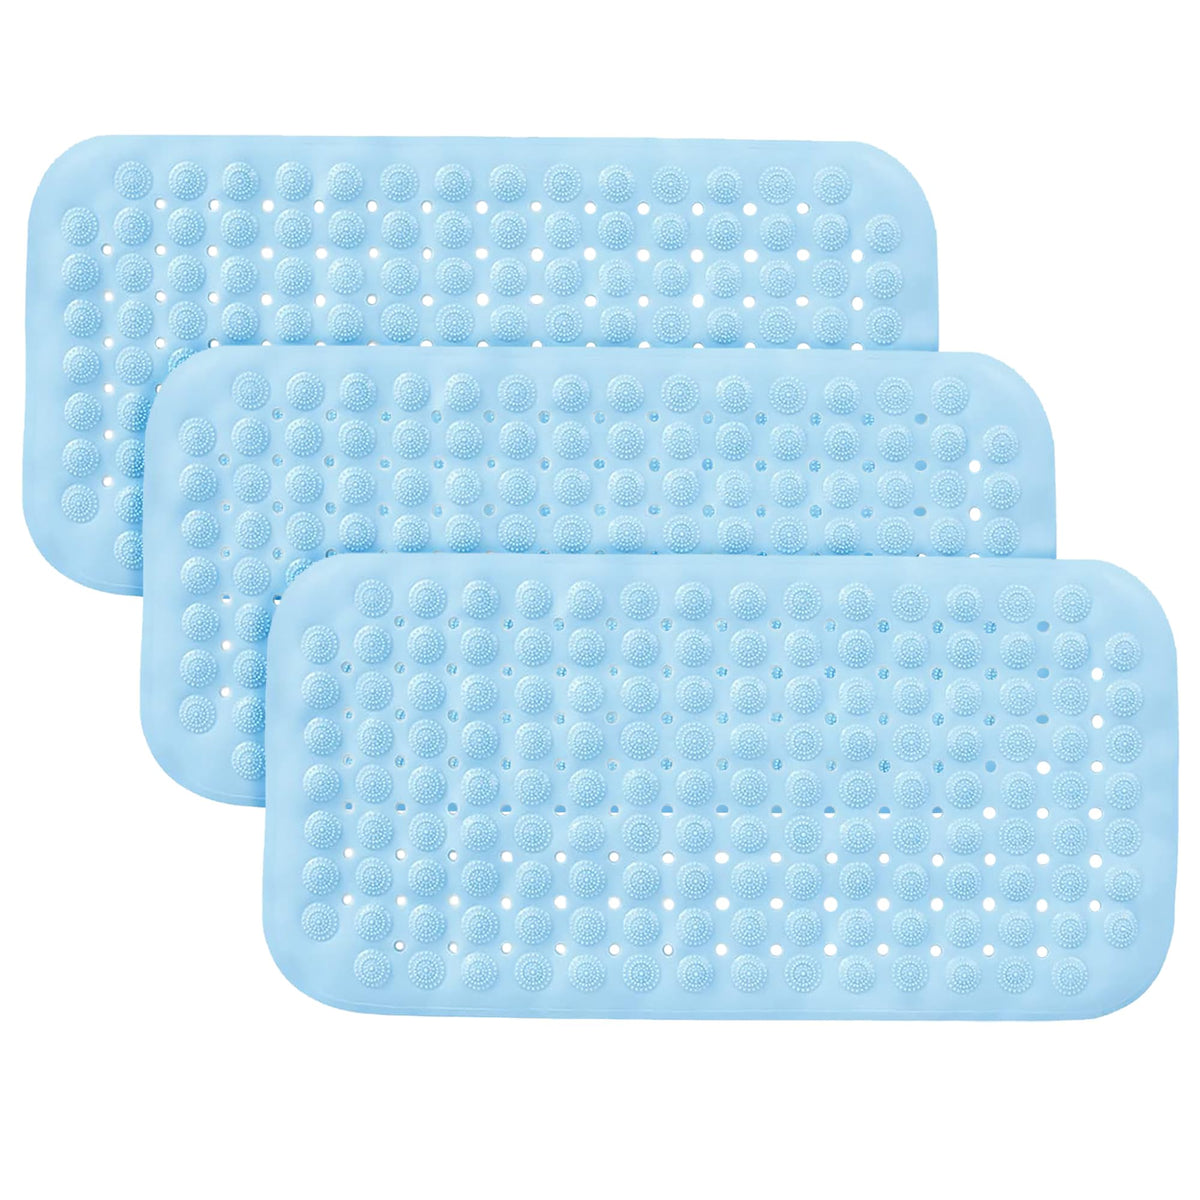 Kuber Industries Bathroom Mat|Anti Slip Mat for Bathroom Floor|Durable,Wear Resistant & Easy to Maintain|Acupressure & Foot Massager Door Mat with Water Drainage Holes|JL01|35 x 70 cm|Blue (Pack Of 3)